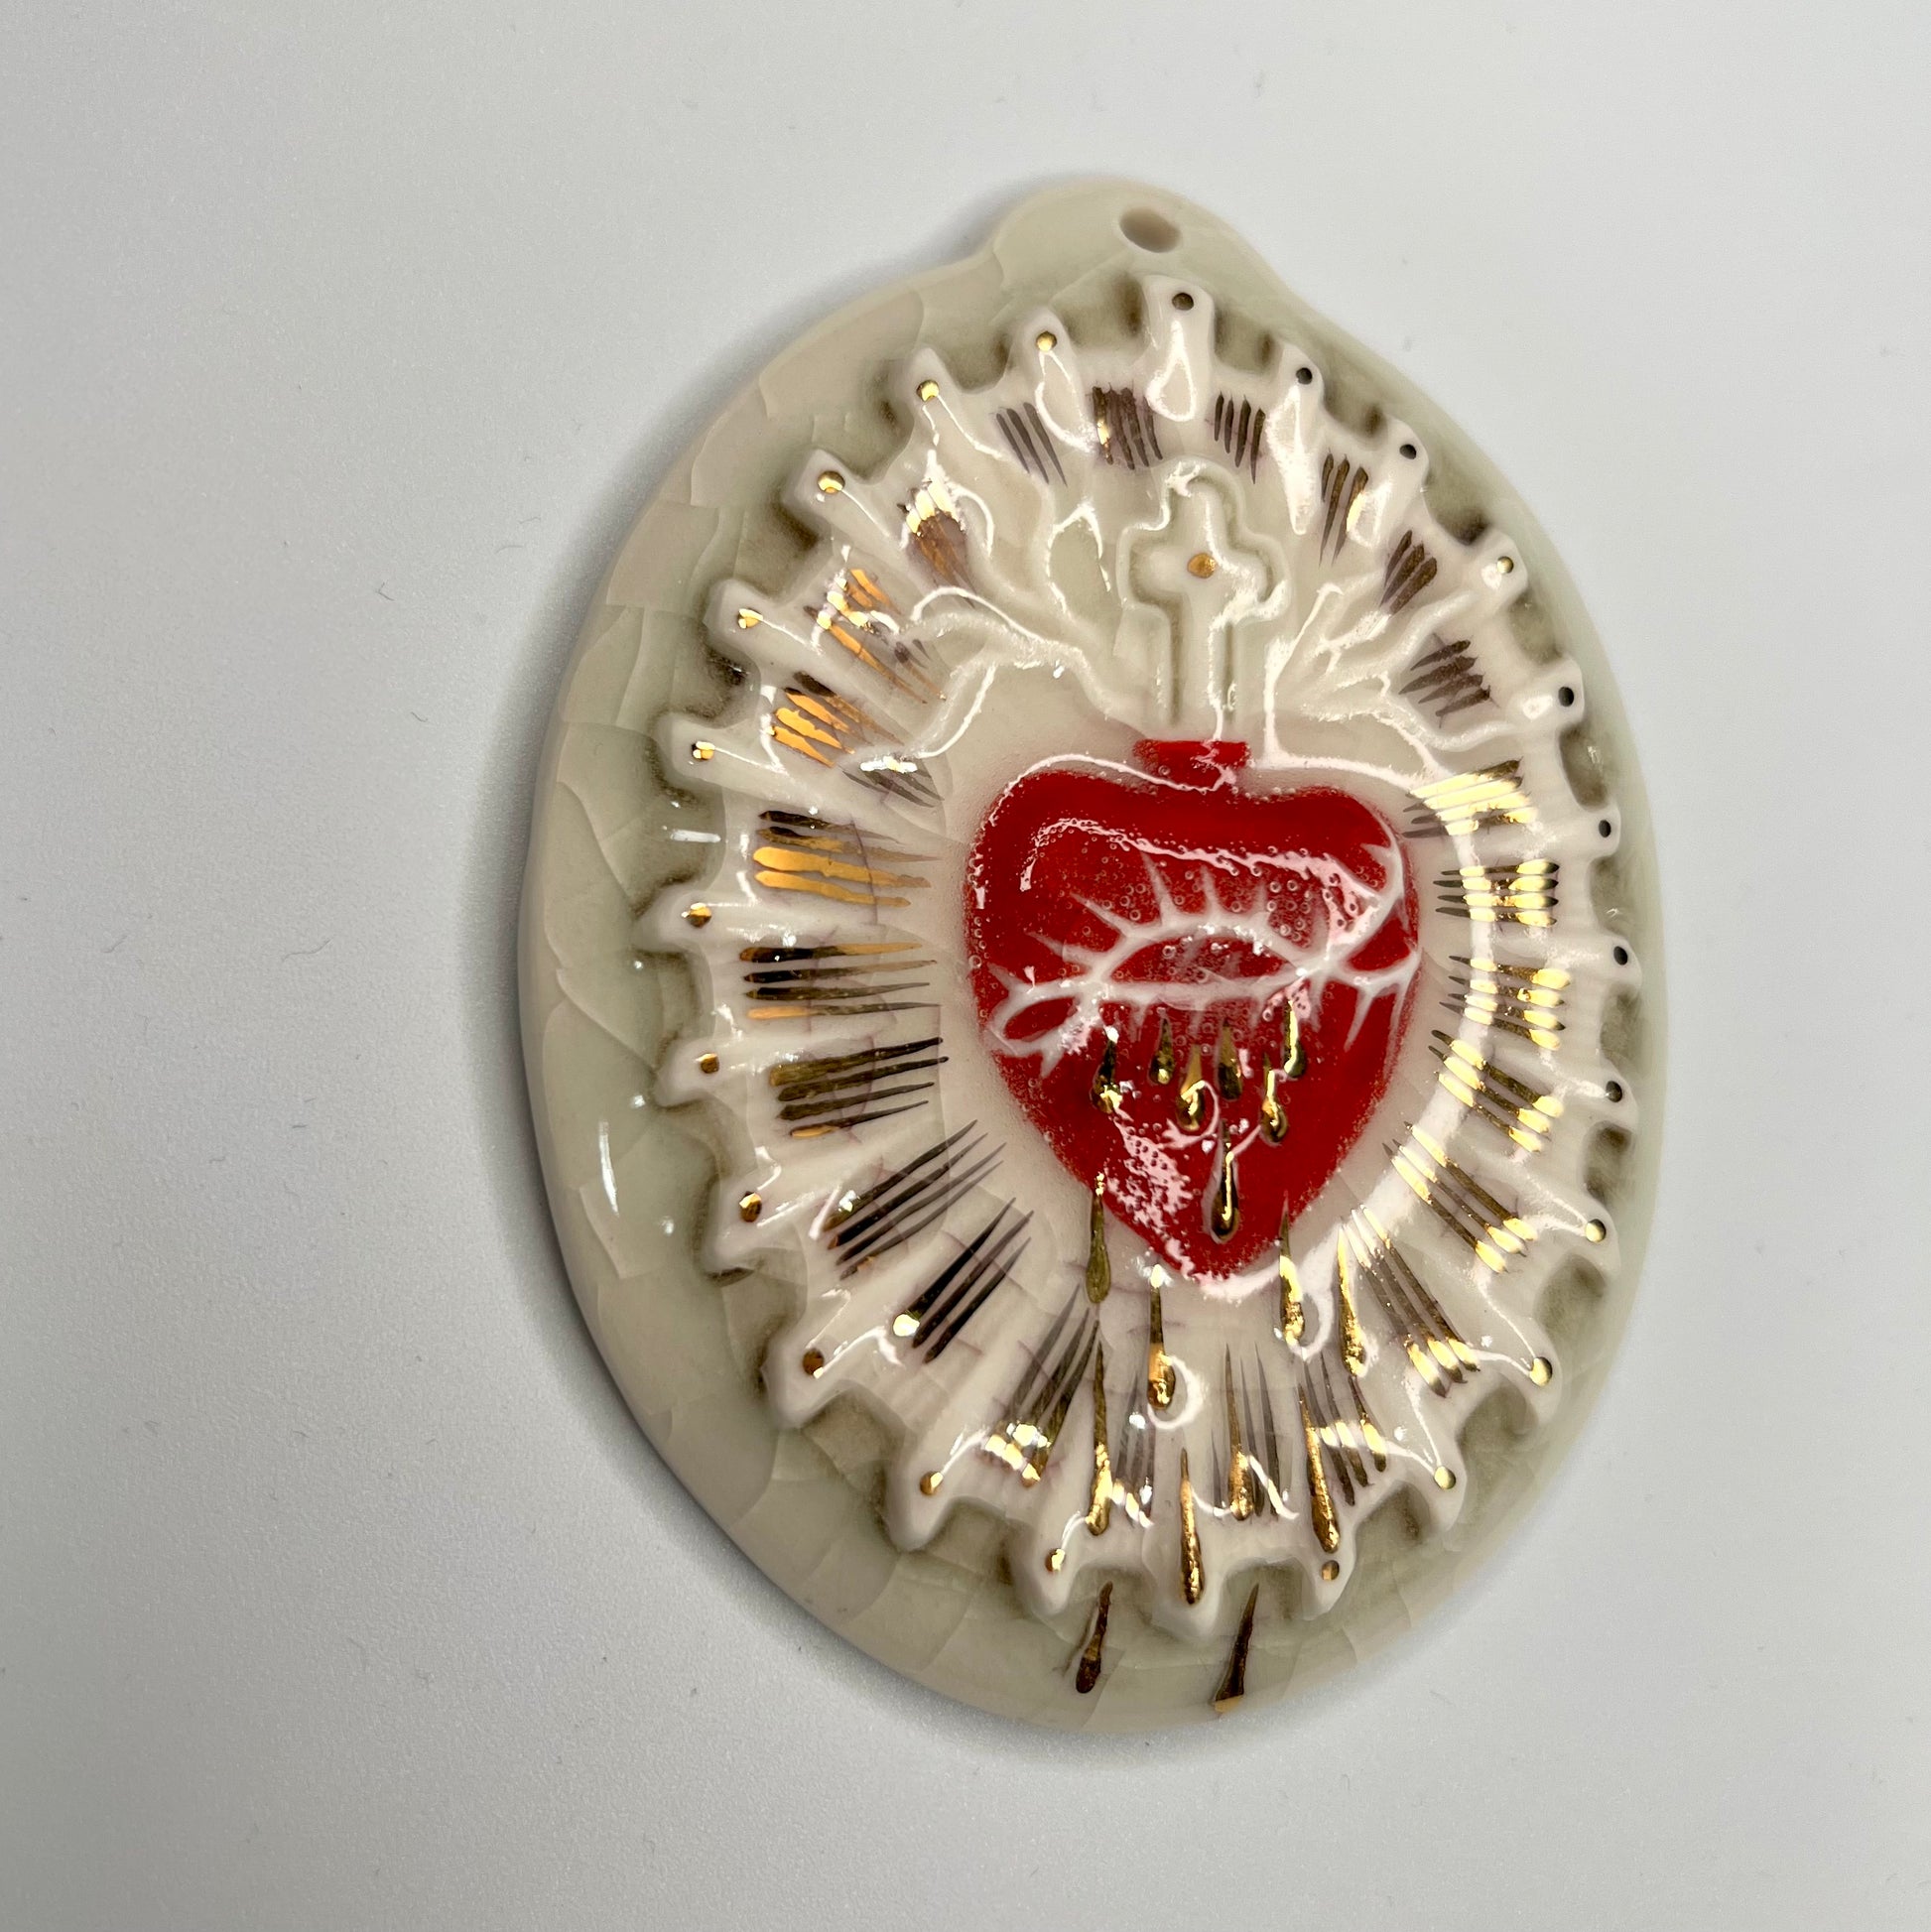 Product Image: Sacred Heart 2 - Hand crafted Porcelain Home Ornament. Red Sacred Heart in thorns.